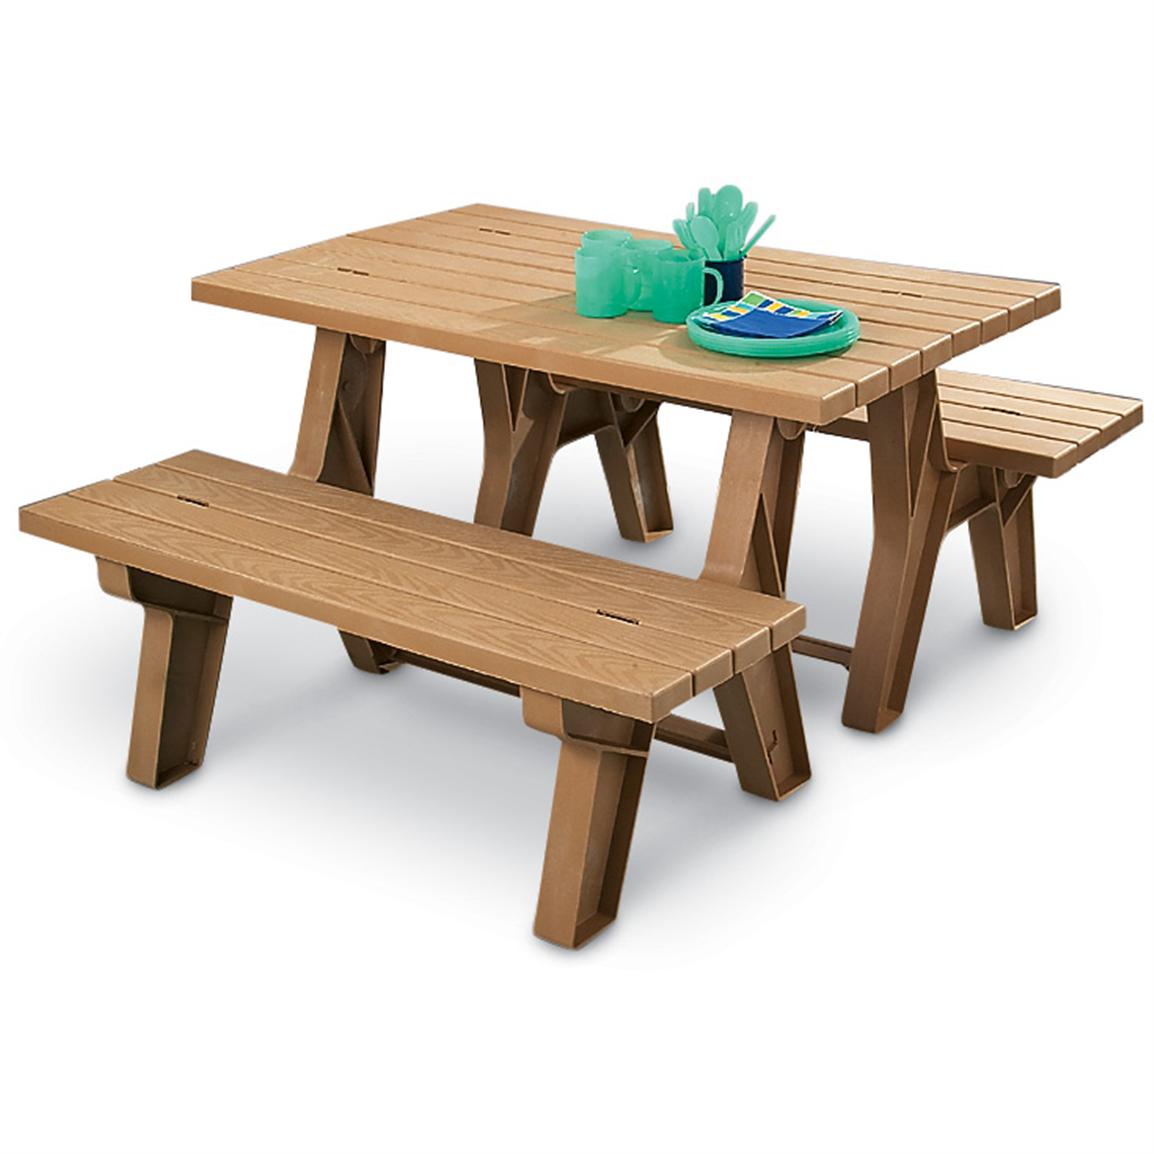 Convertible Bench Picnic Table 91816 Patio Furniture 